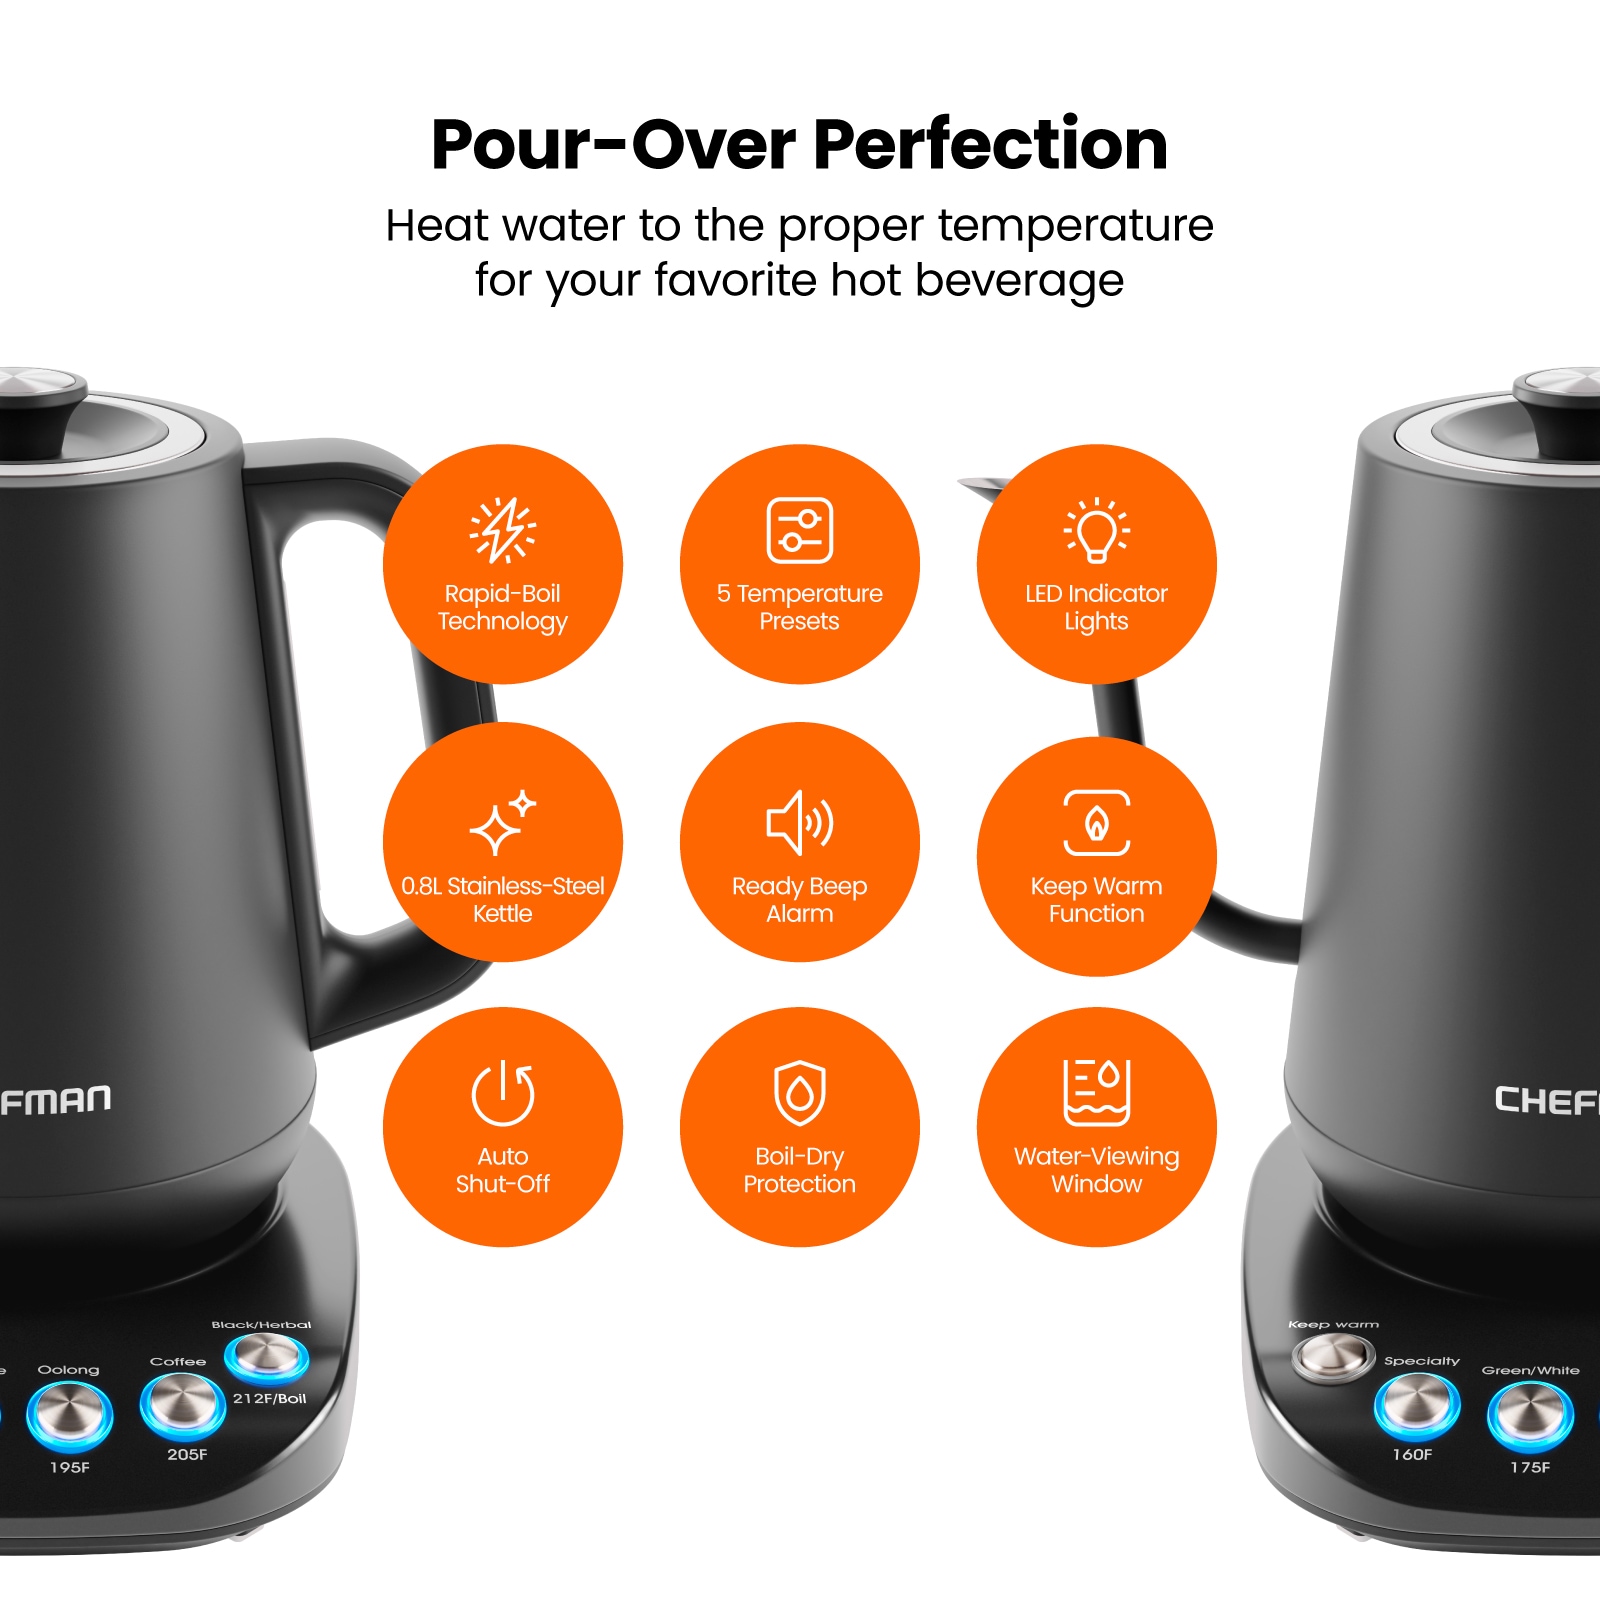 Best kitchen appliance deals: Save on Chefman kettles, a microwave, and  more